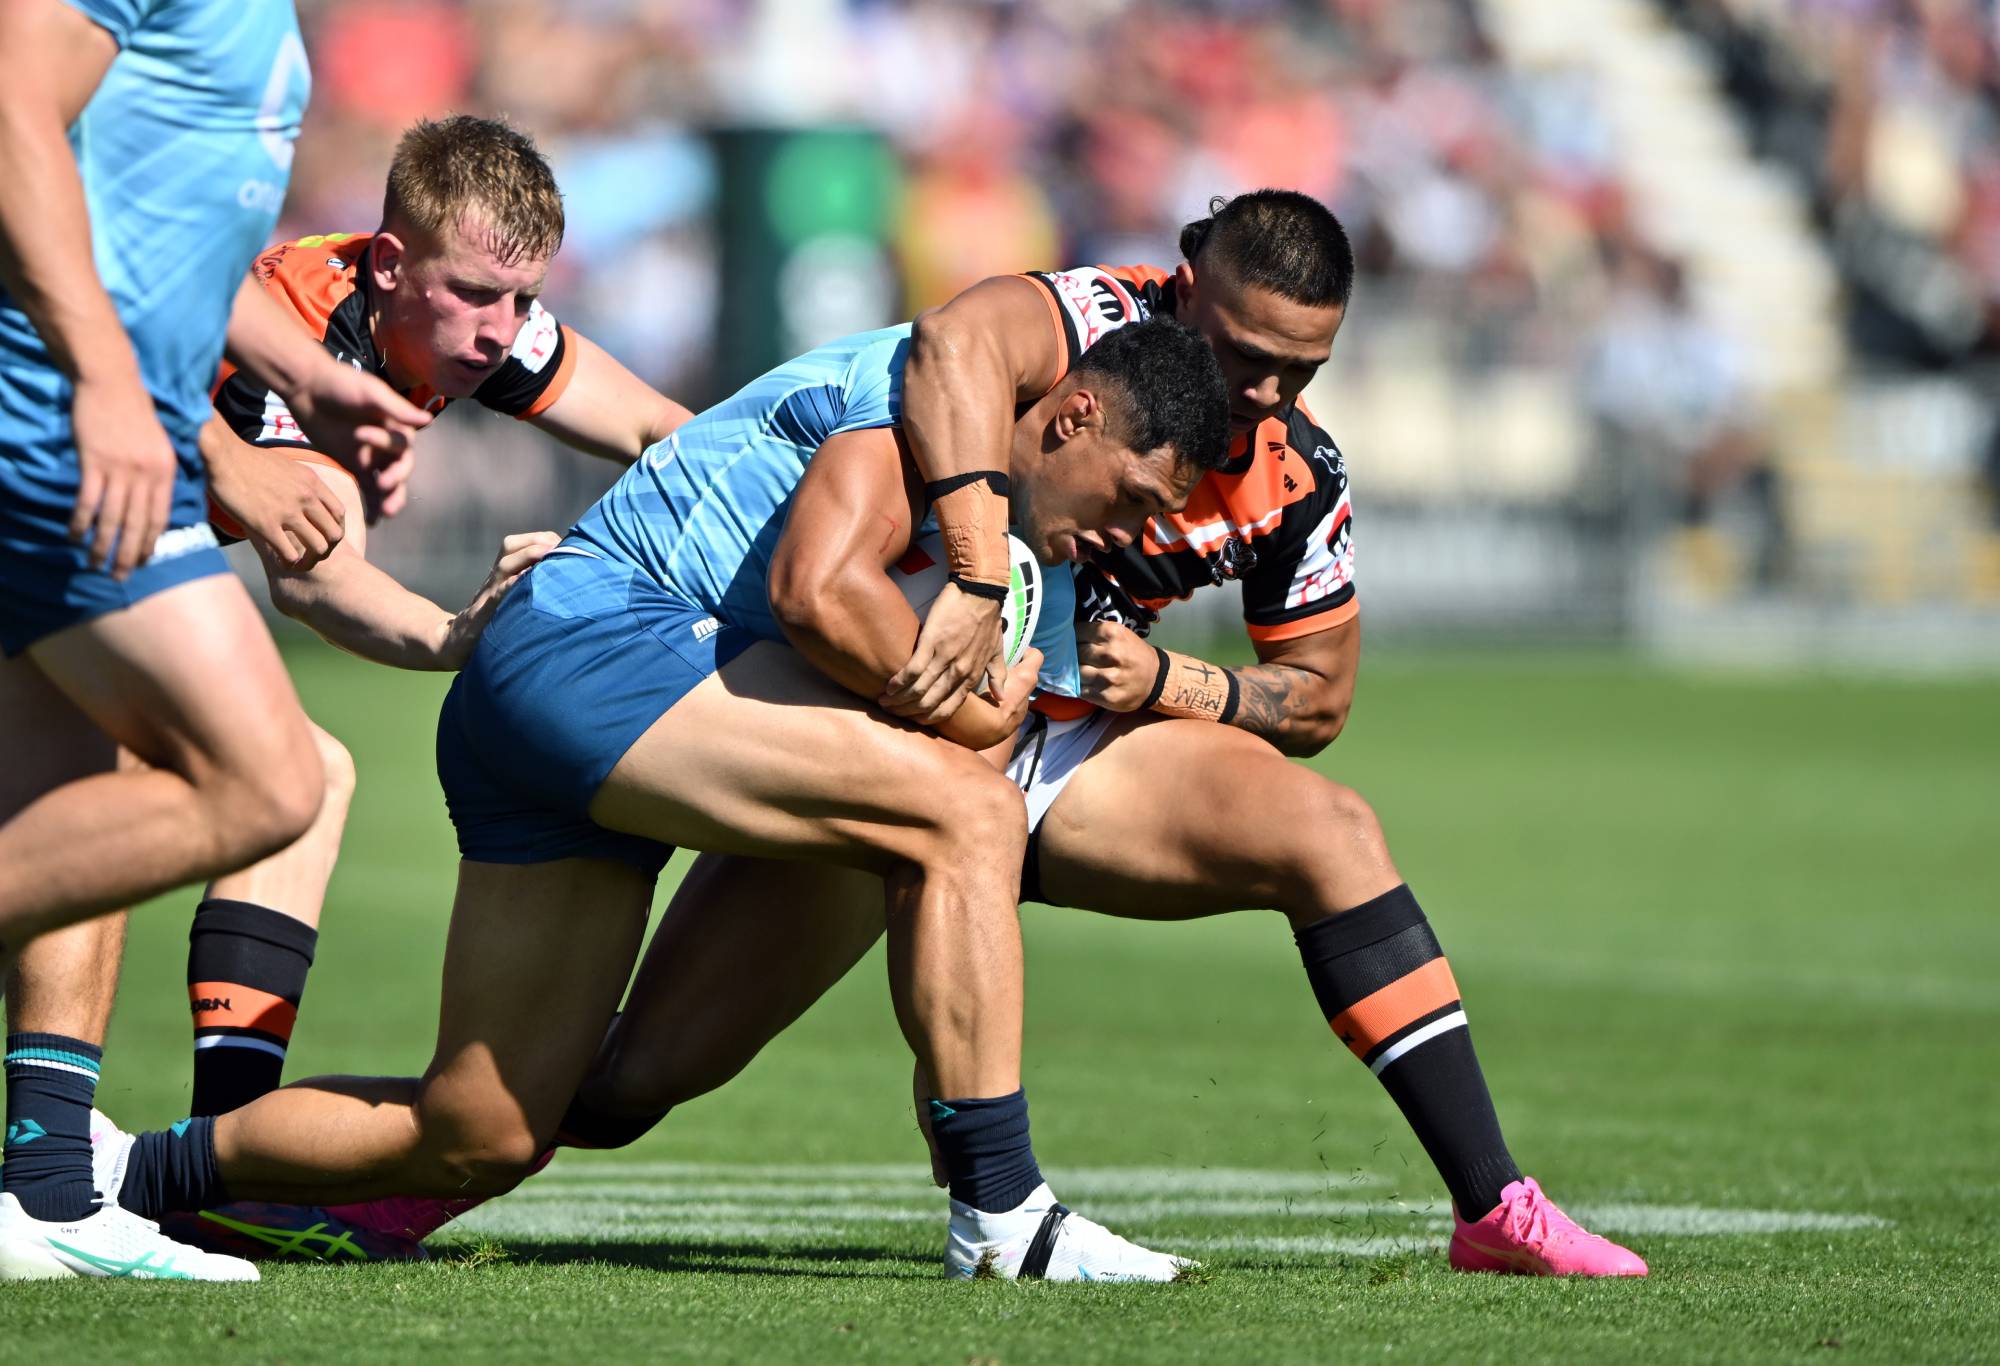 Roger Tuivasa-Sheck is tackled. (Photo by Kai Schwoerer/Getty Images)